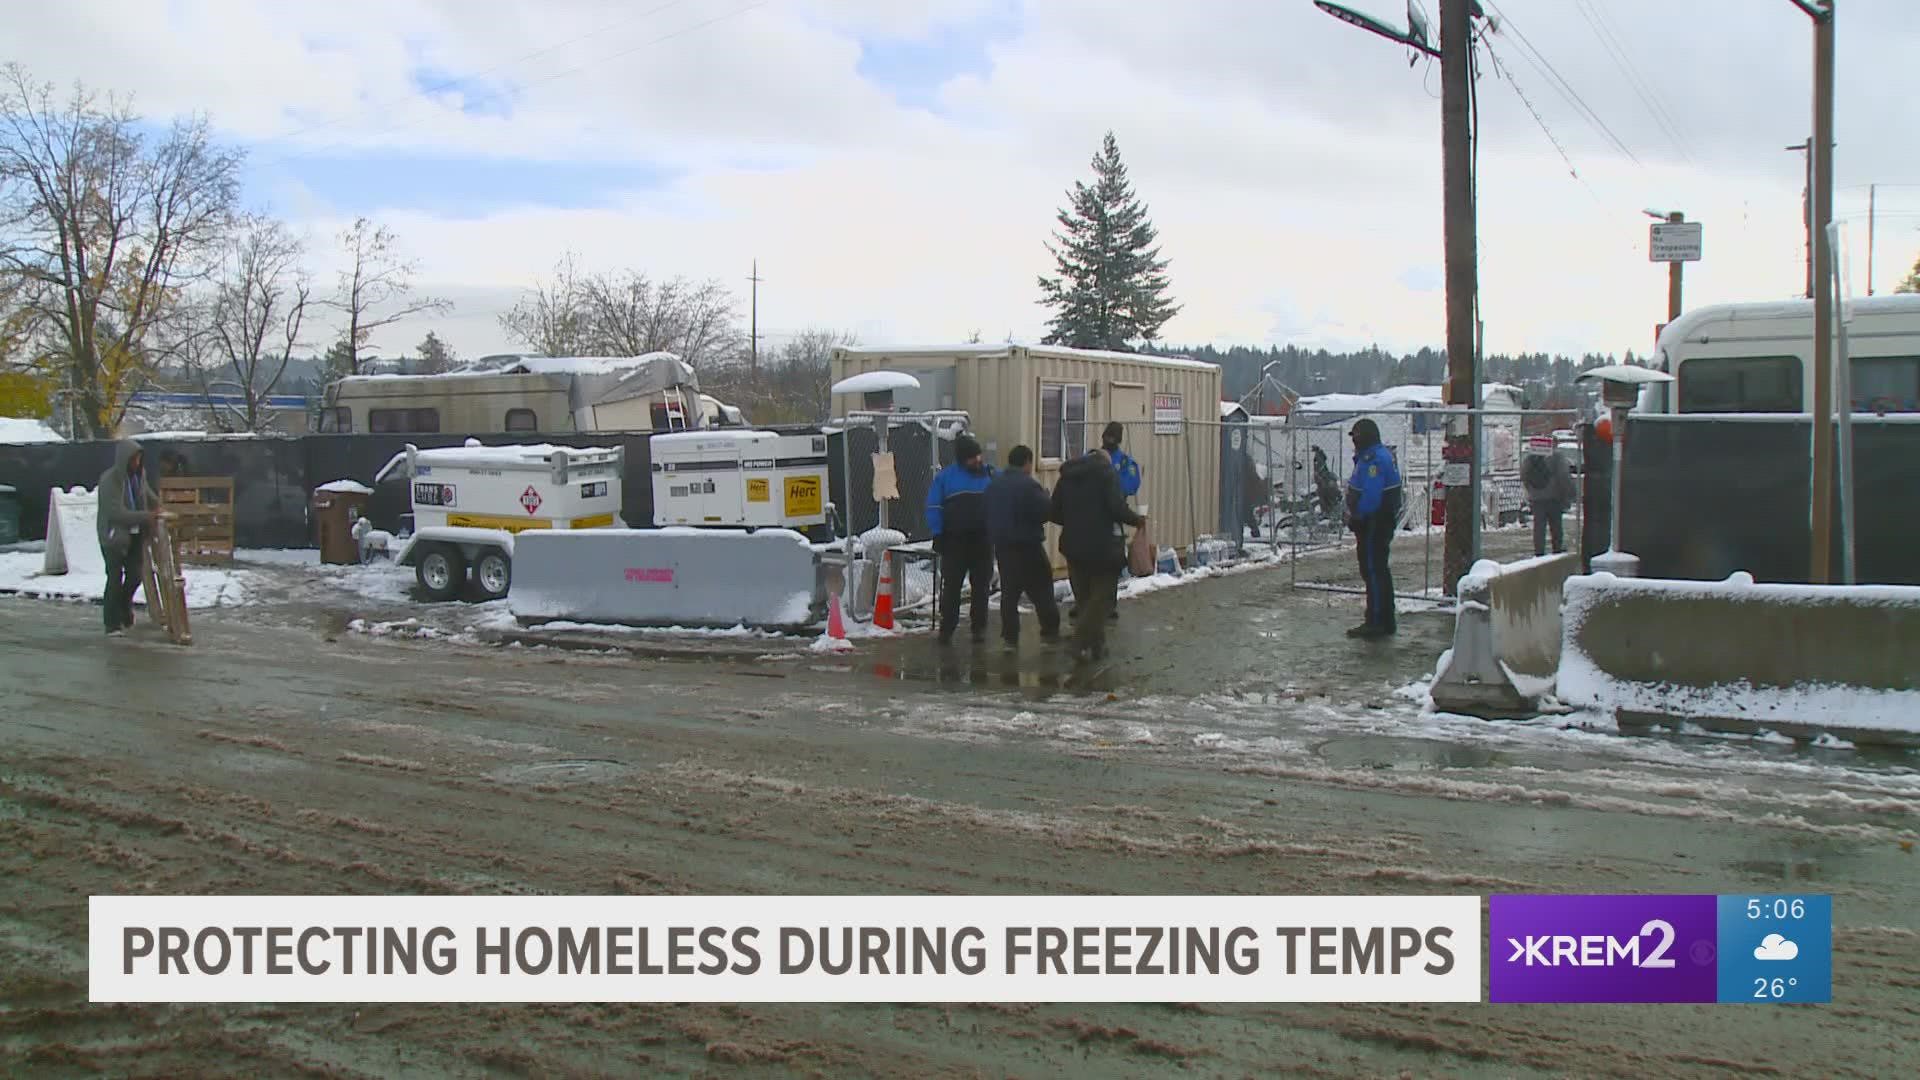 The homeless camp off I-90 is taking efforts to make sure the homeless population stays warm as the winter settles in.